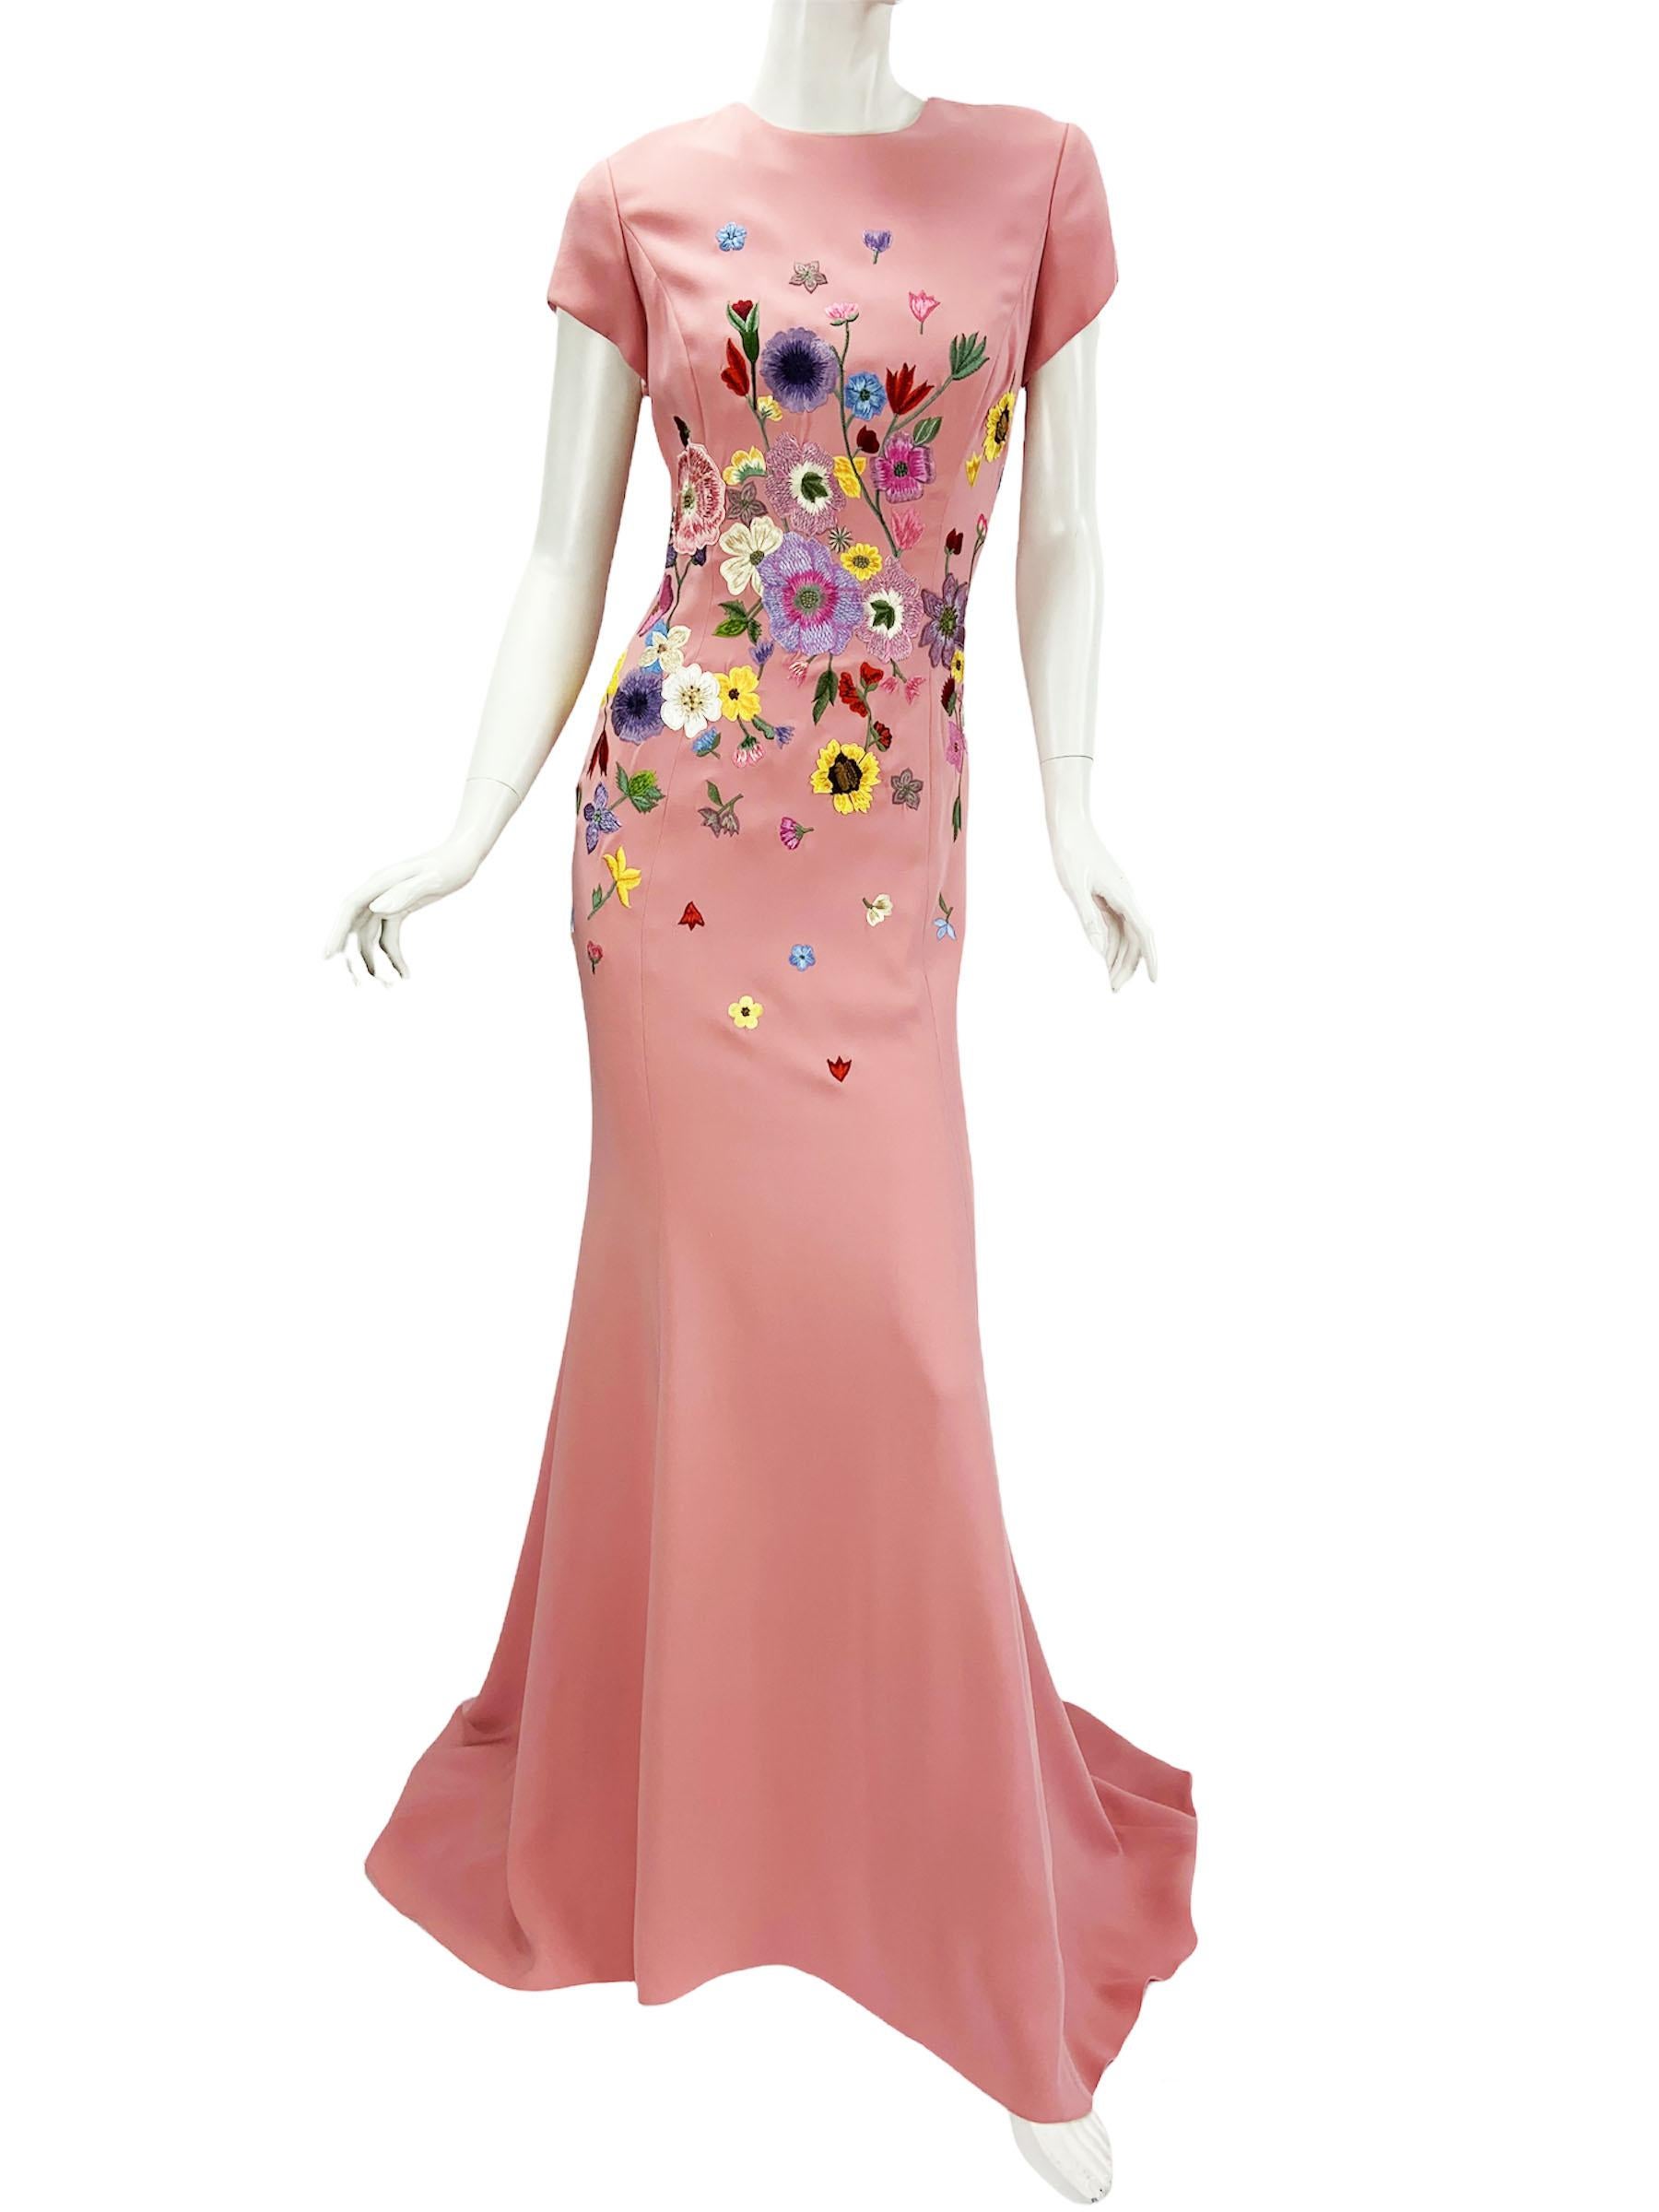 Oscar De La Renta Flower Embroidery Maxi Dress Gown
F/W 2021 Collection
Designer size 4 ( oversize - please check measurements).
Exquisite Flower Embroidery, 92% Silk, 8% Elastane, Fully Lined in Stretch Silk, Back Zip Closure.
Measurements: Length